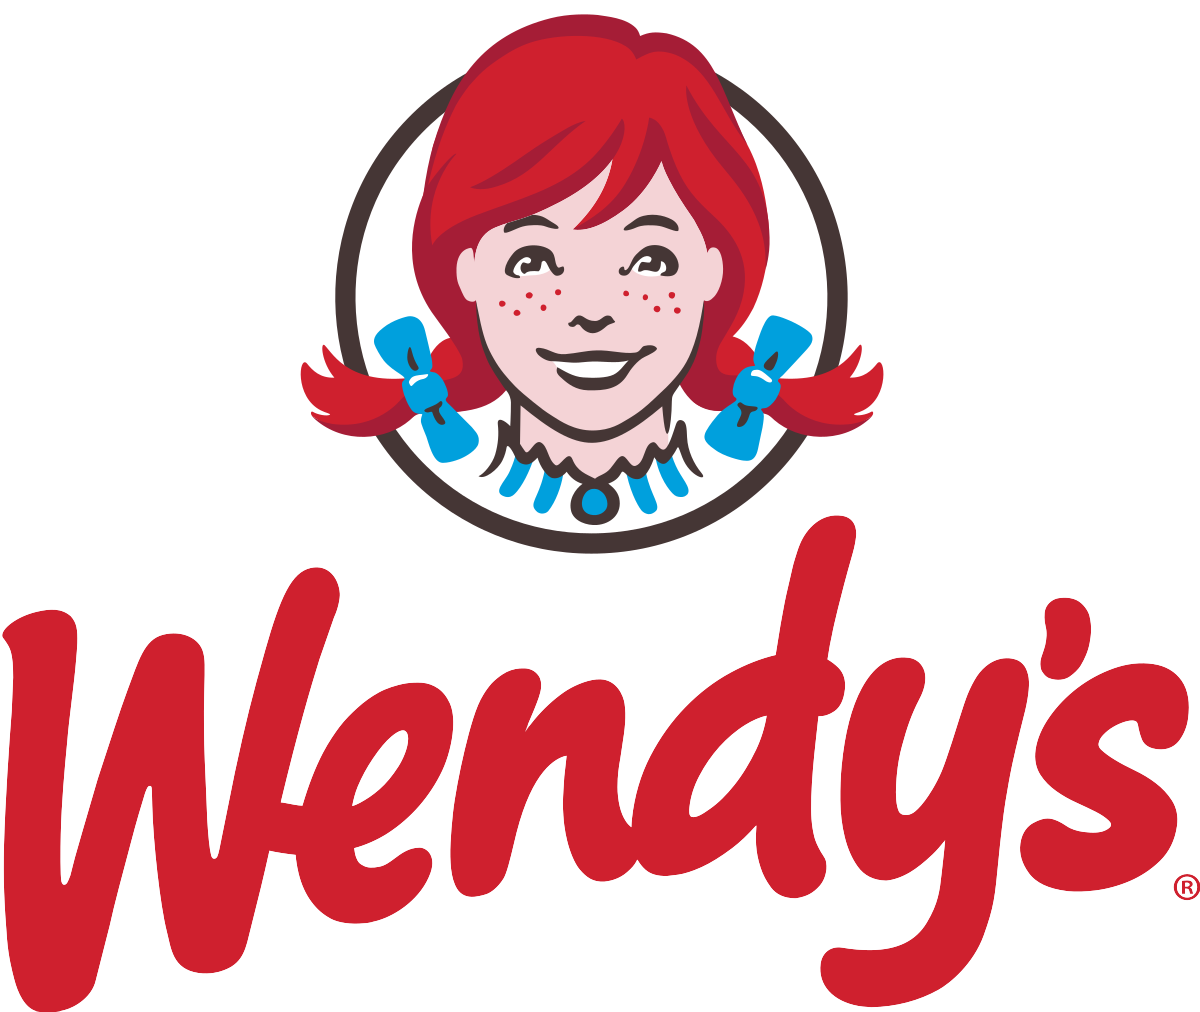 Wendy's: Dave's Double $2, Dave's Single